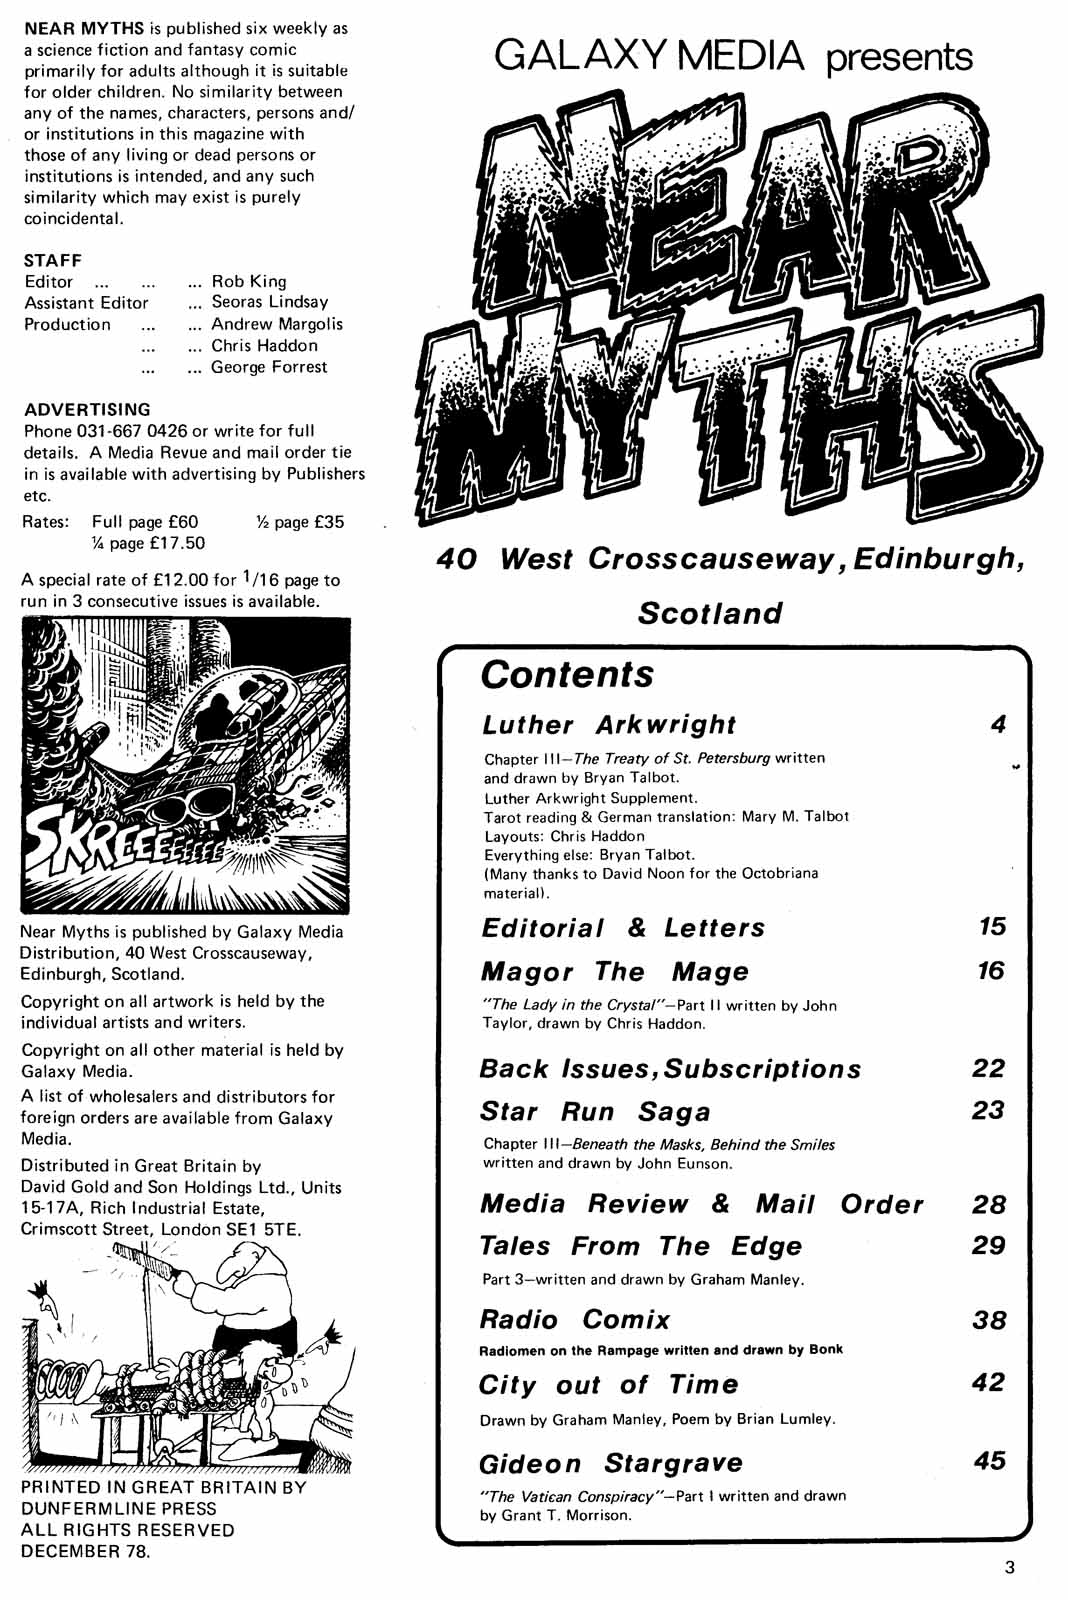 Read online Near Myths comic -  Issue #3 - 3